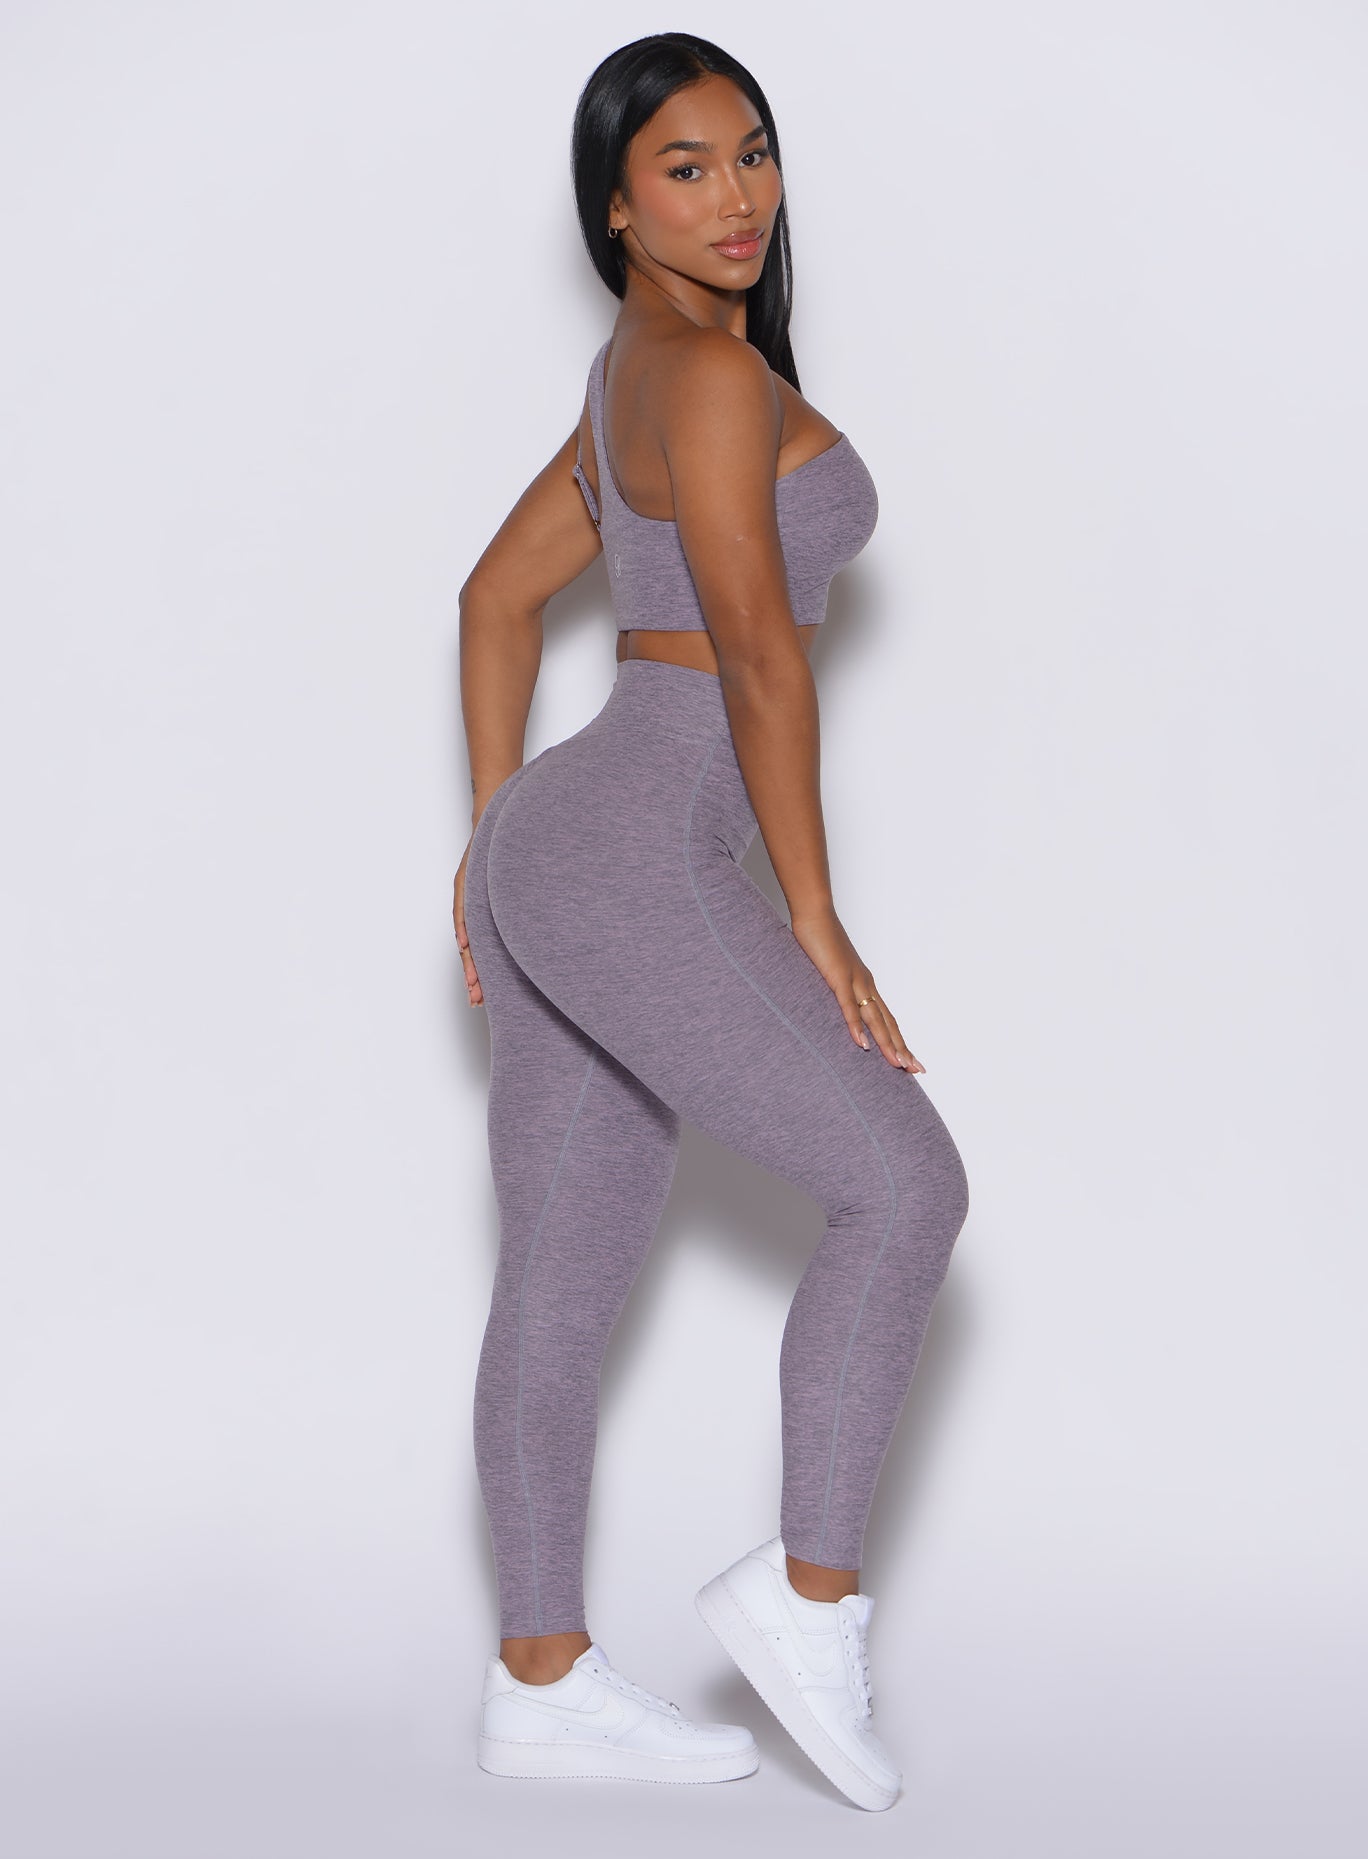 right side profile view of a model wearing our V Active Leggings in lilac gray color along with the matching top